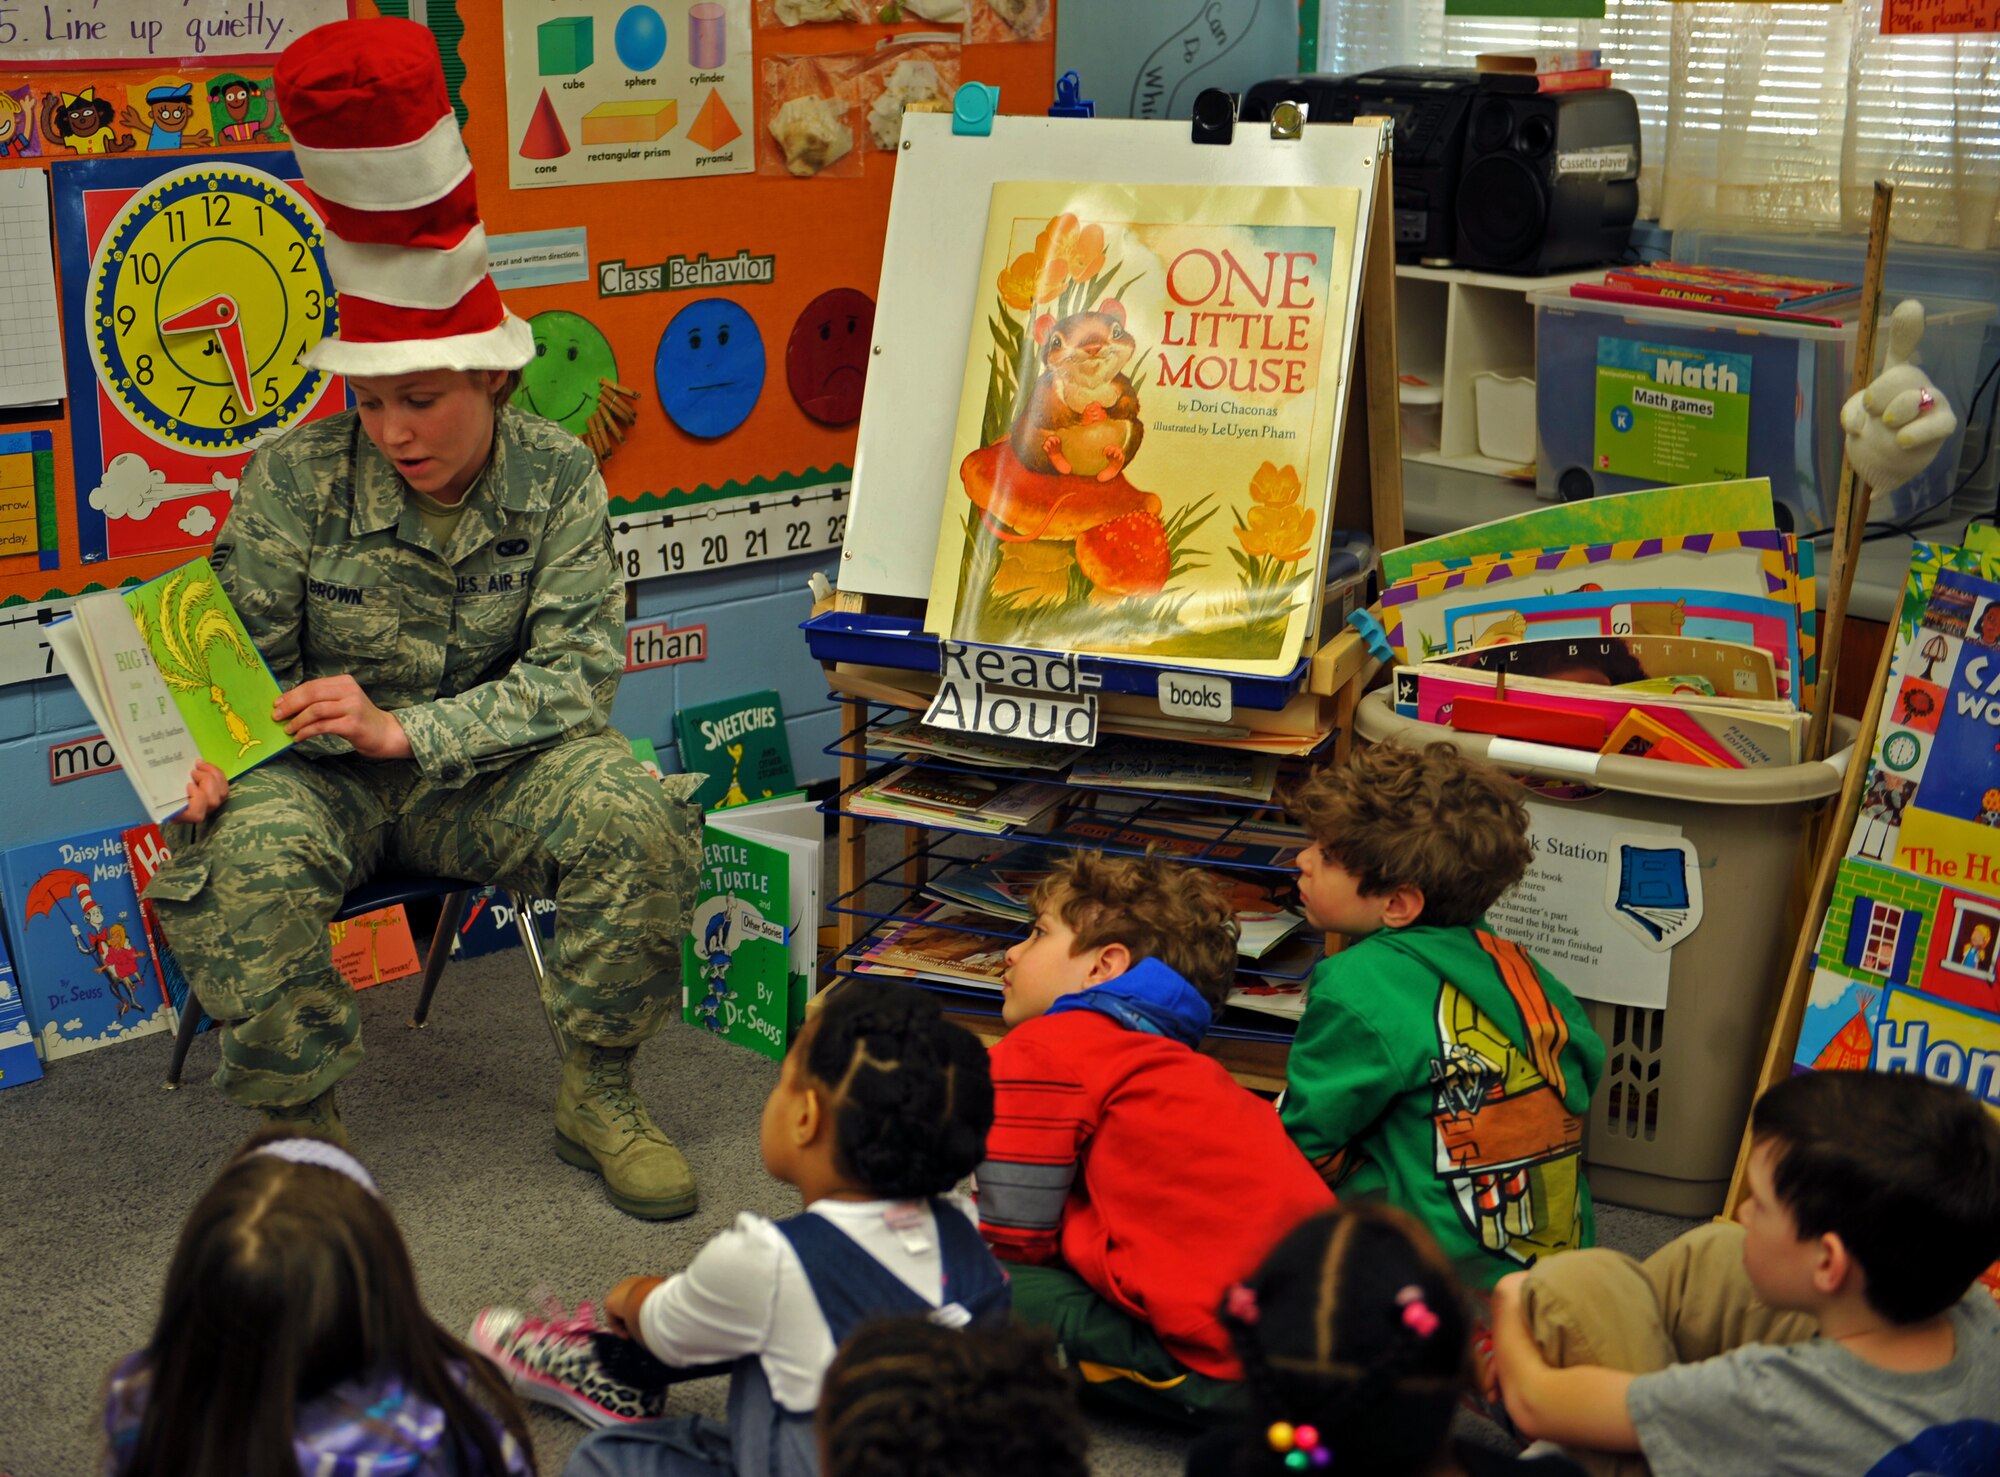 Senior Airman Stevie Brown, a member of the 51st Security Forces Squadron, reads a book to kindergarten students during Read Across America Day in celebration of Dr. Seuss’ Birthday at Osan Air Base, Republic of Korea, March 5, 2014. More than 50 Team Osan military members volunteered to read to 21 Osan American Elementary School classes. (U.S. Air Force photo/Senior Airman Siuta B. Ika)